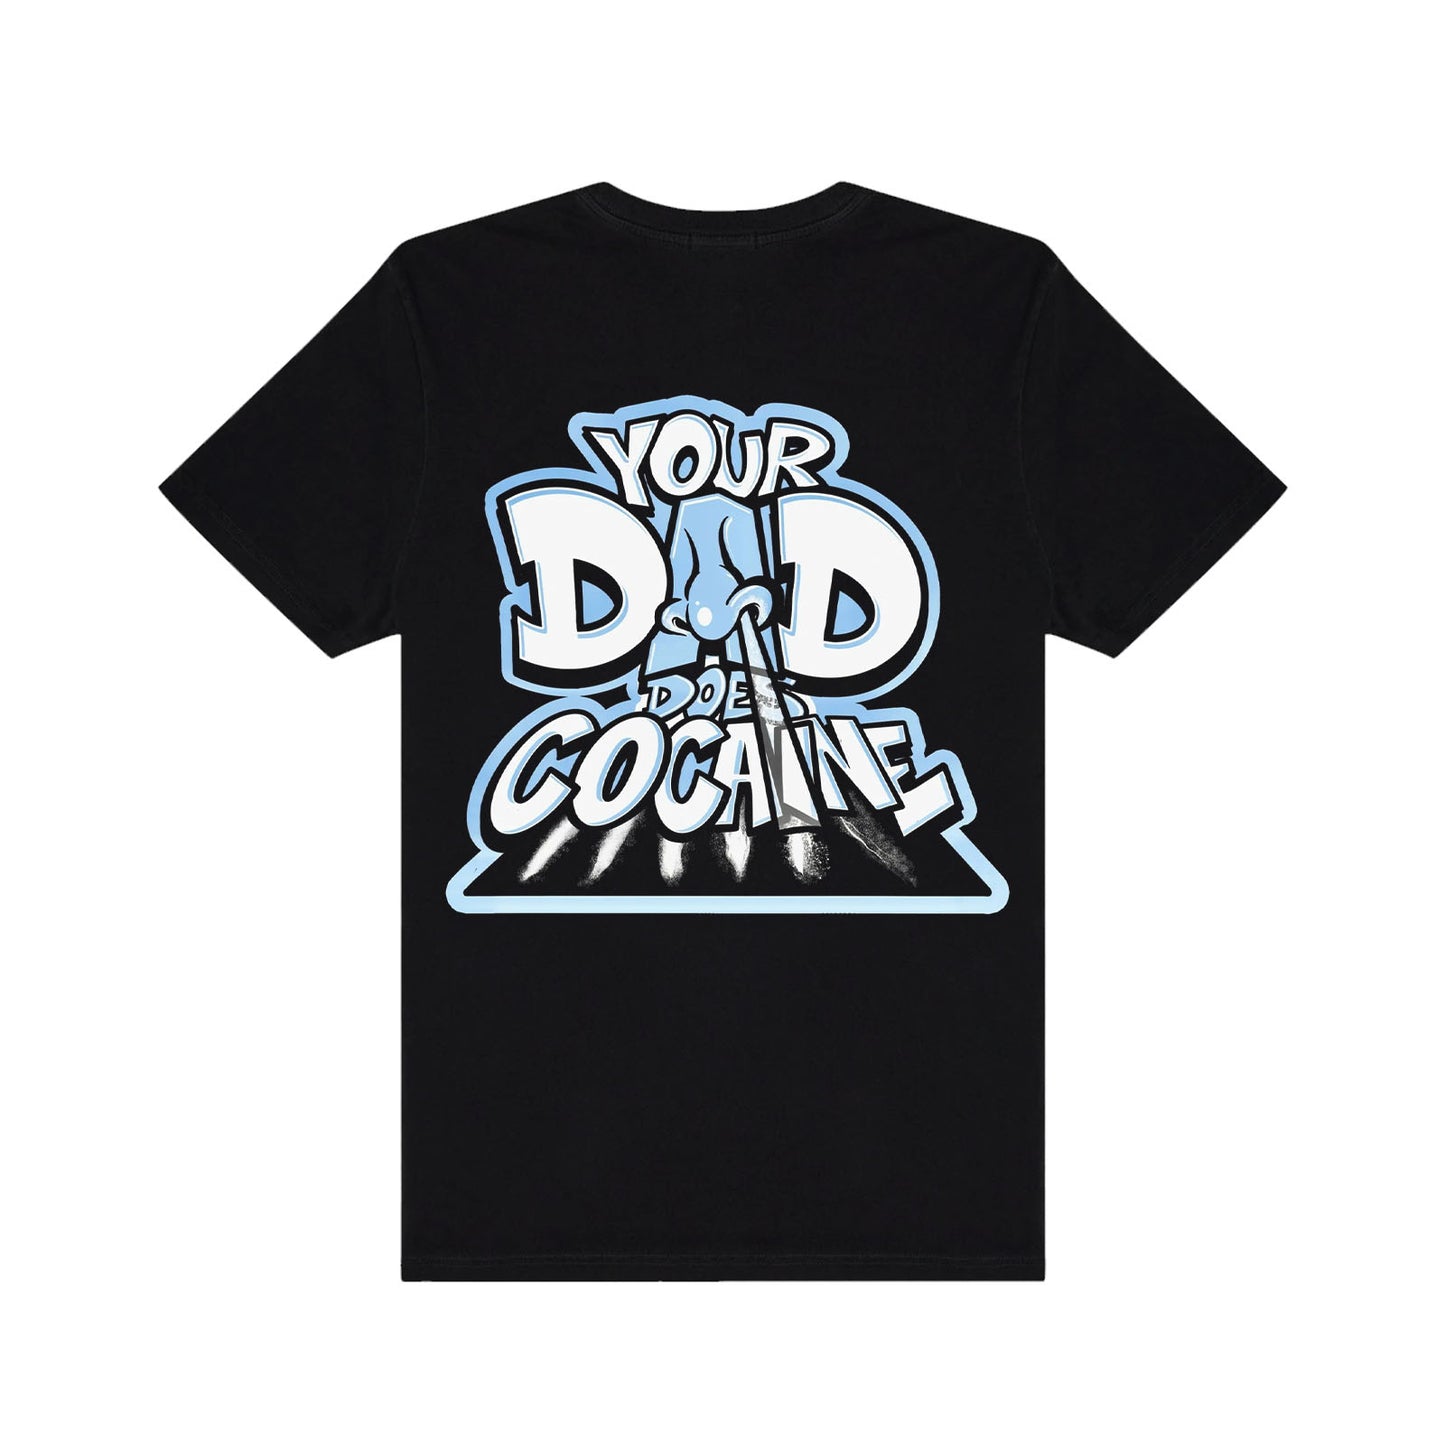 "Your Dad" Black T-Shirt